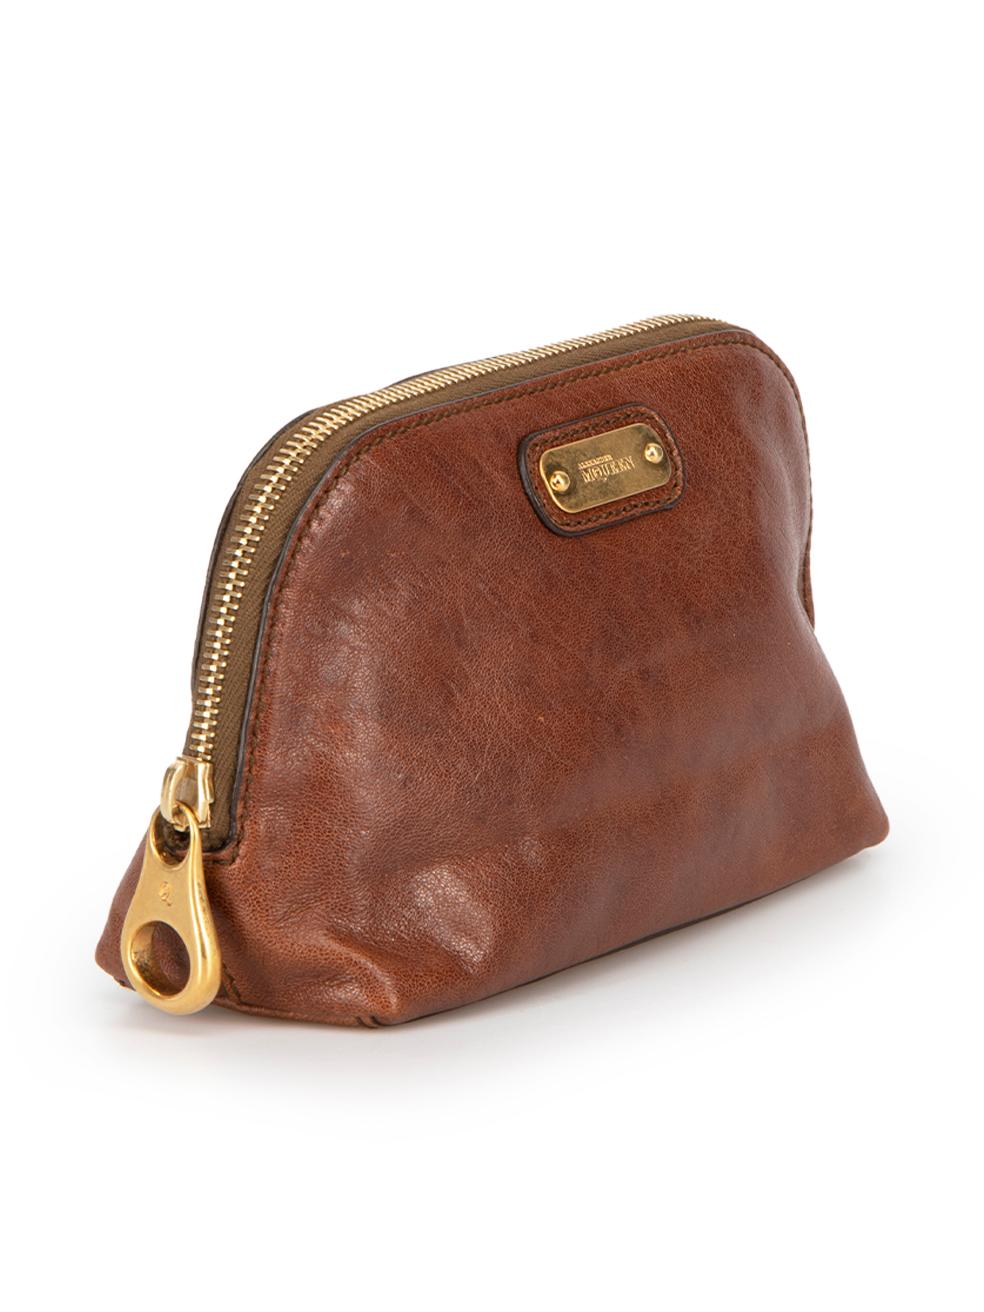 CONDITION is Good. Minimal wear to pouch is evident. General creasing to leather and slight tarnishing of hardware on this used Alexander McQueen leather pouch.



Details


Brown

Leather

Cosmetic bag

1x Main compartment

Zip fastening

Logo